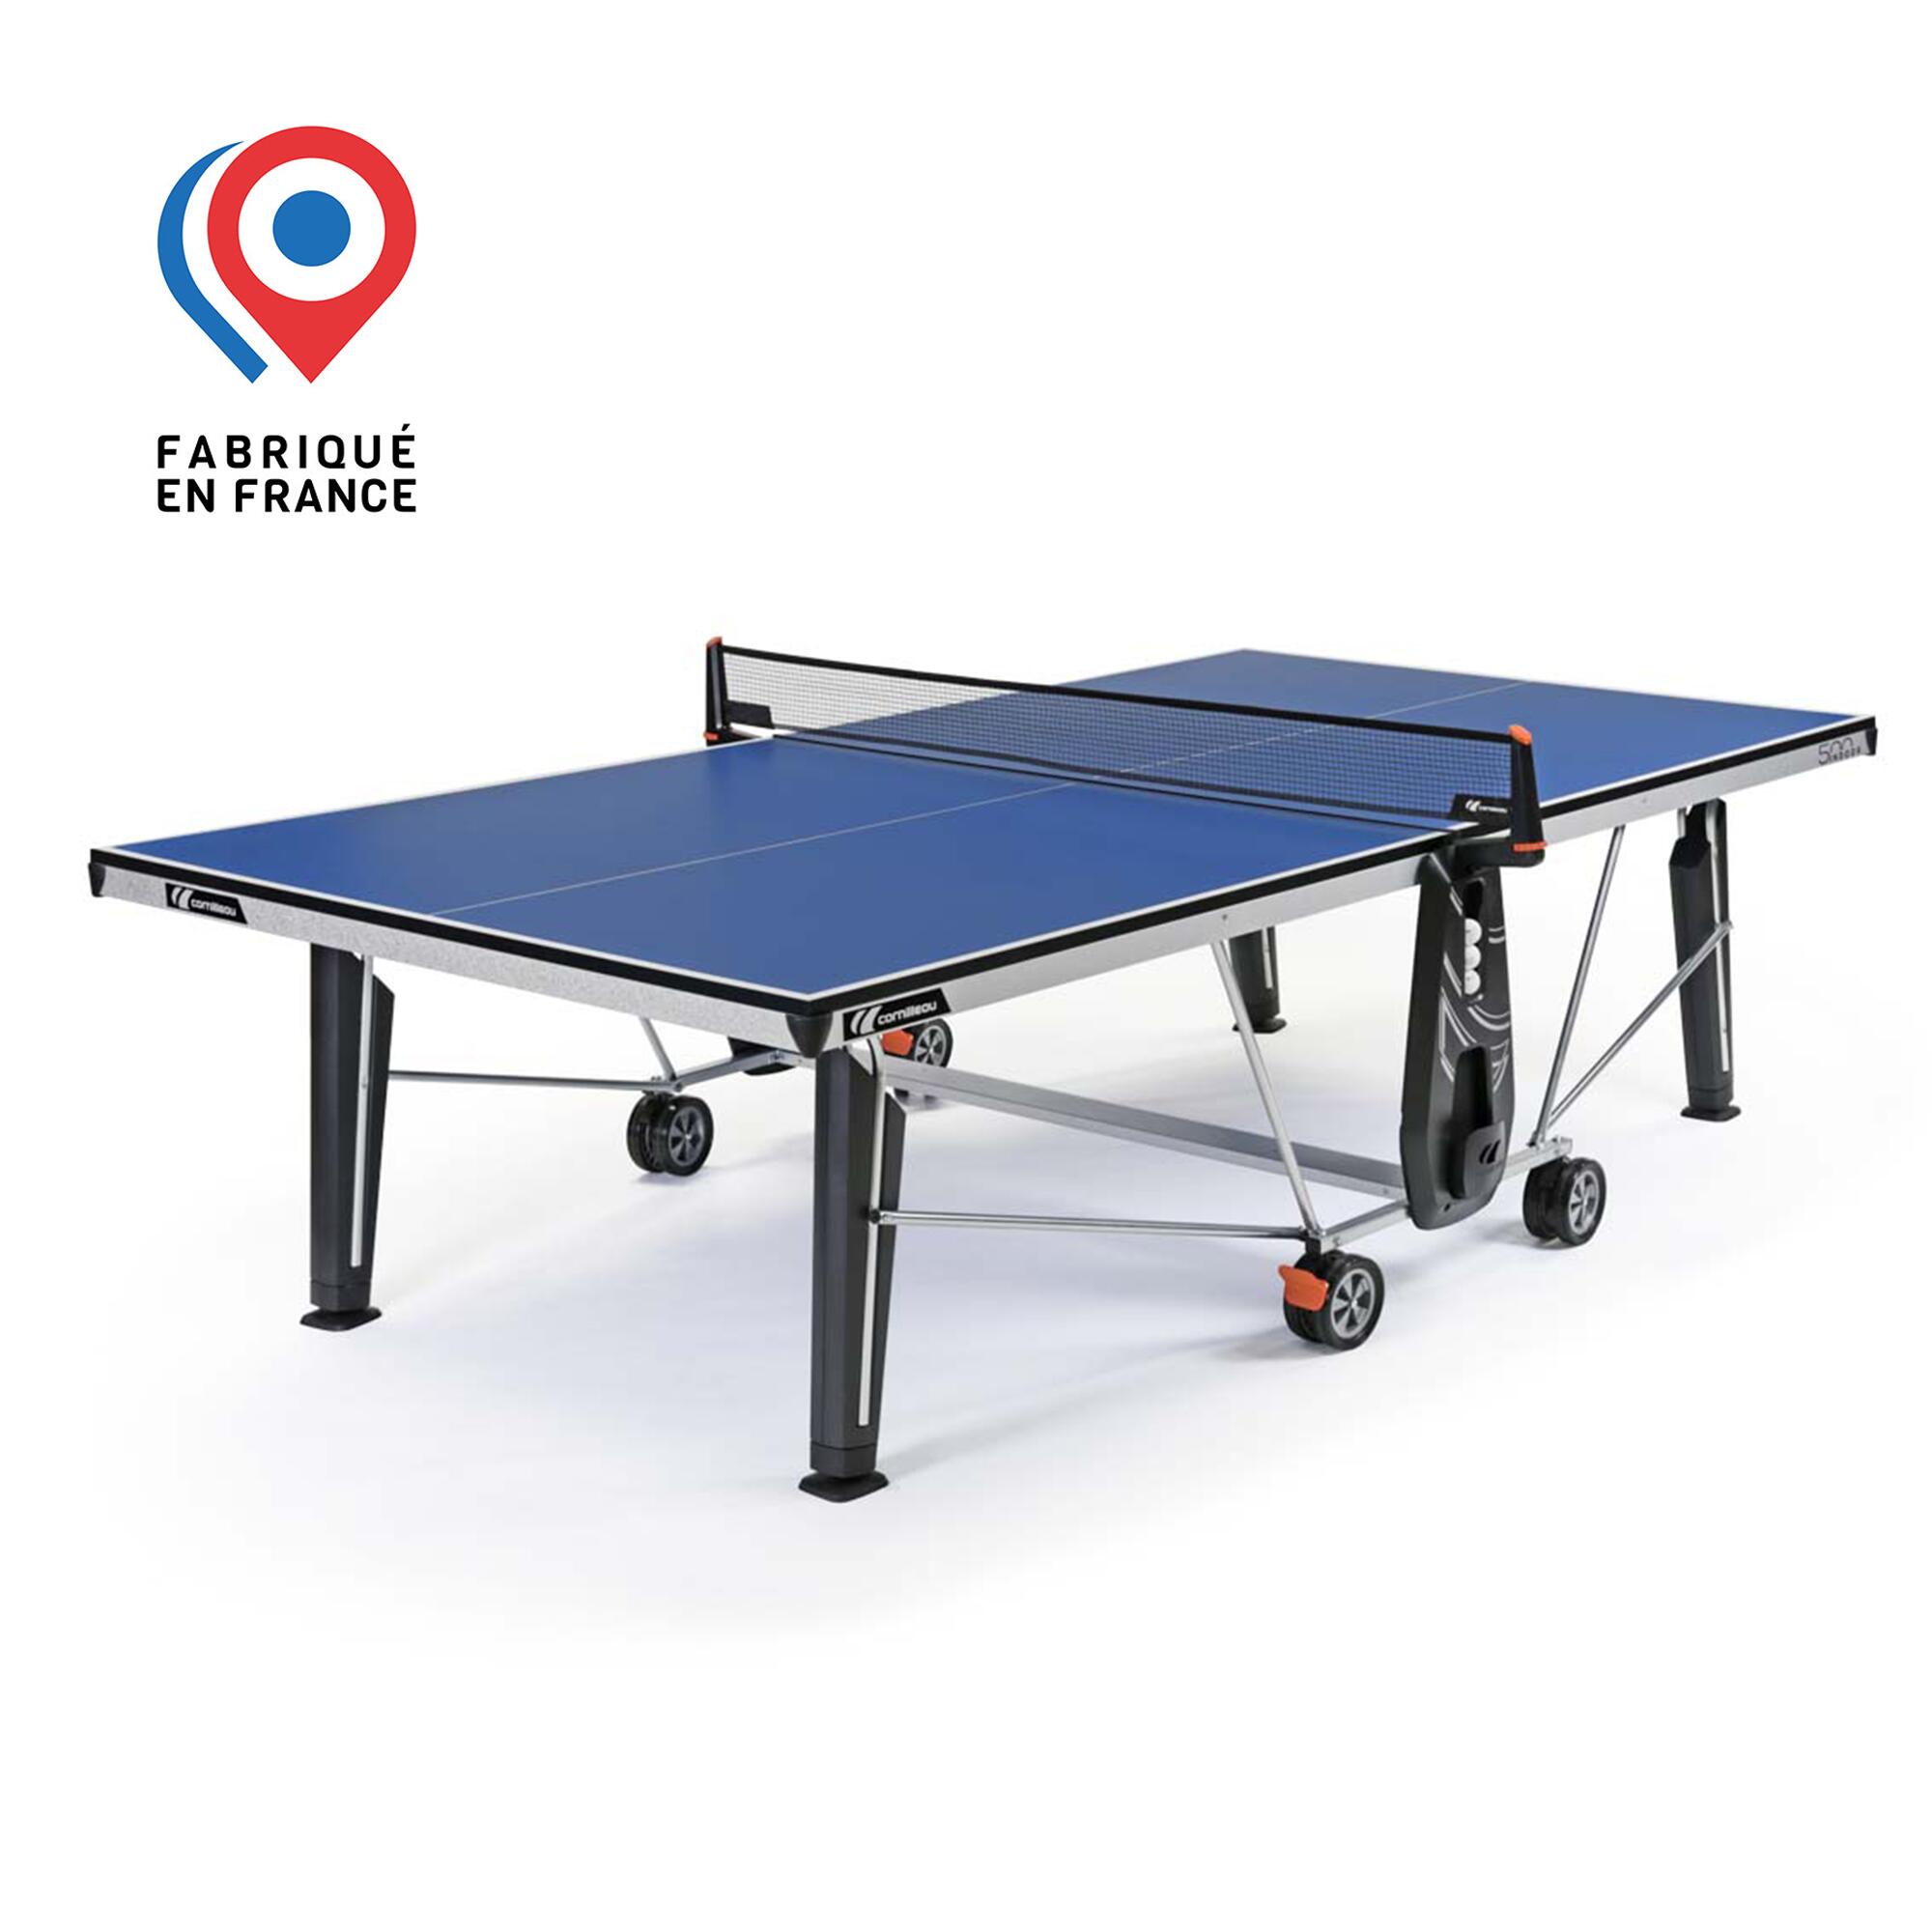 NEW 500 Indoor Table Tennis Table - Blue 1/8